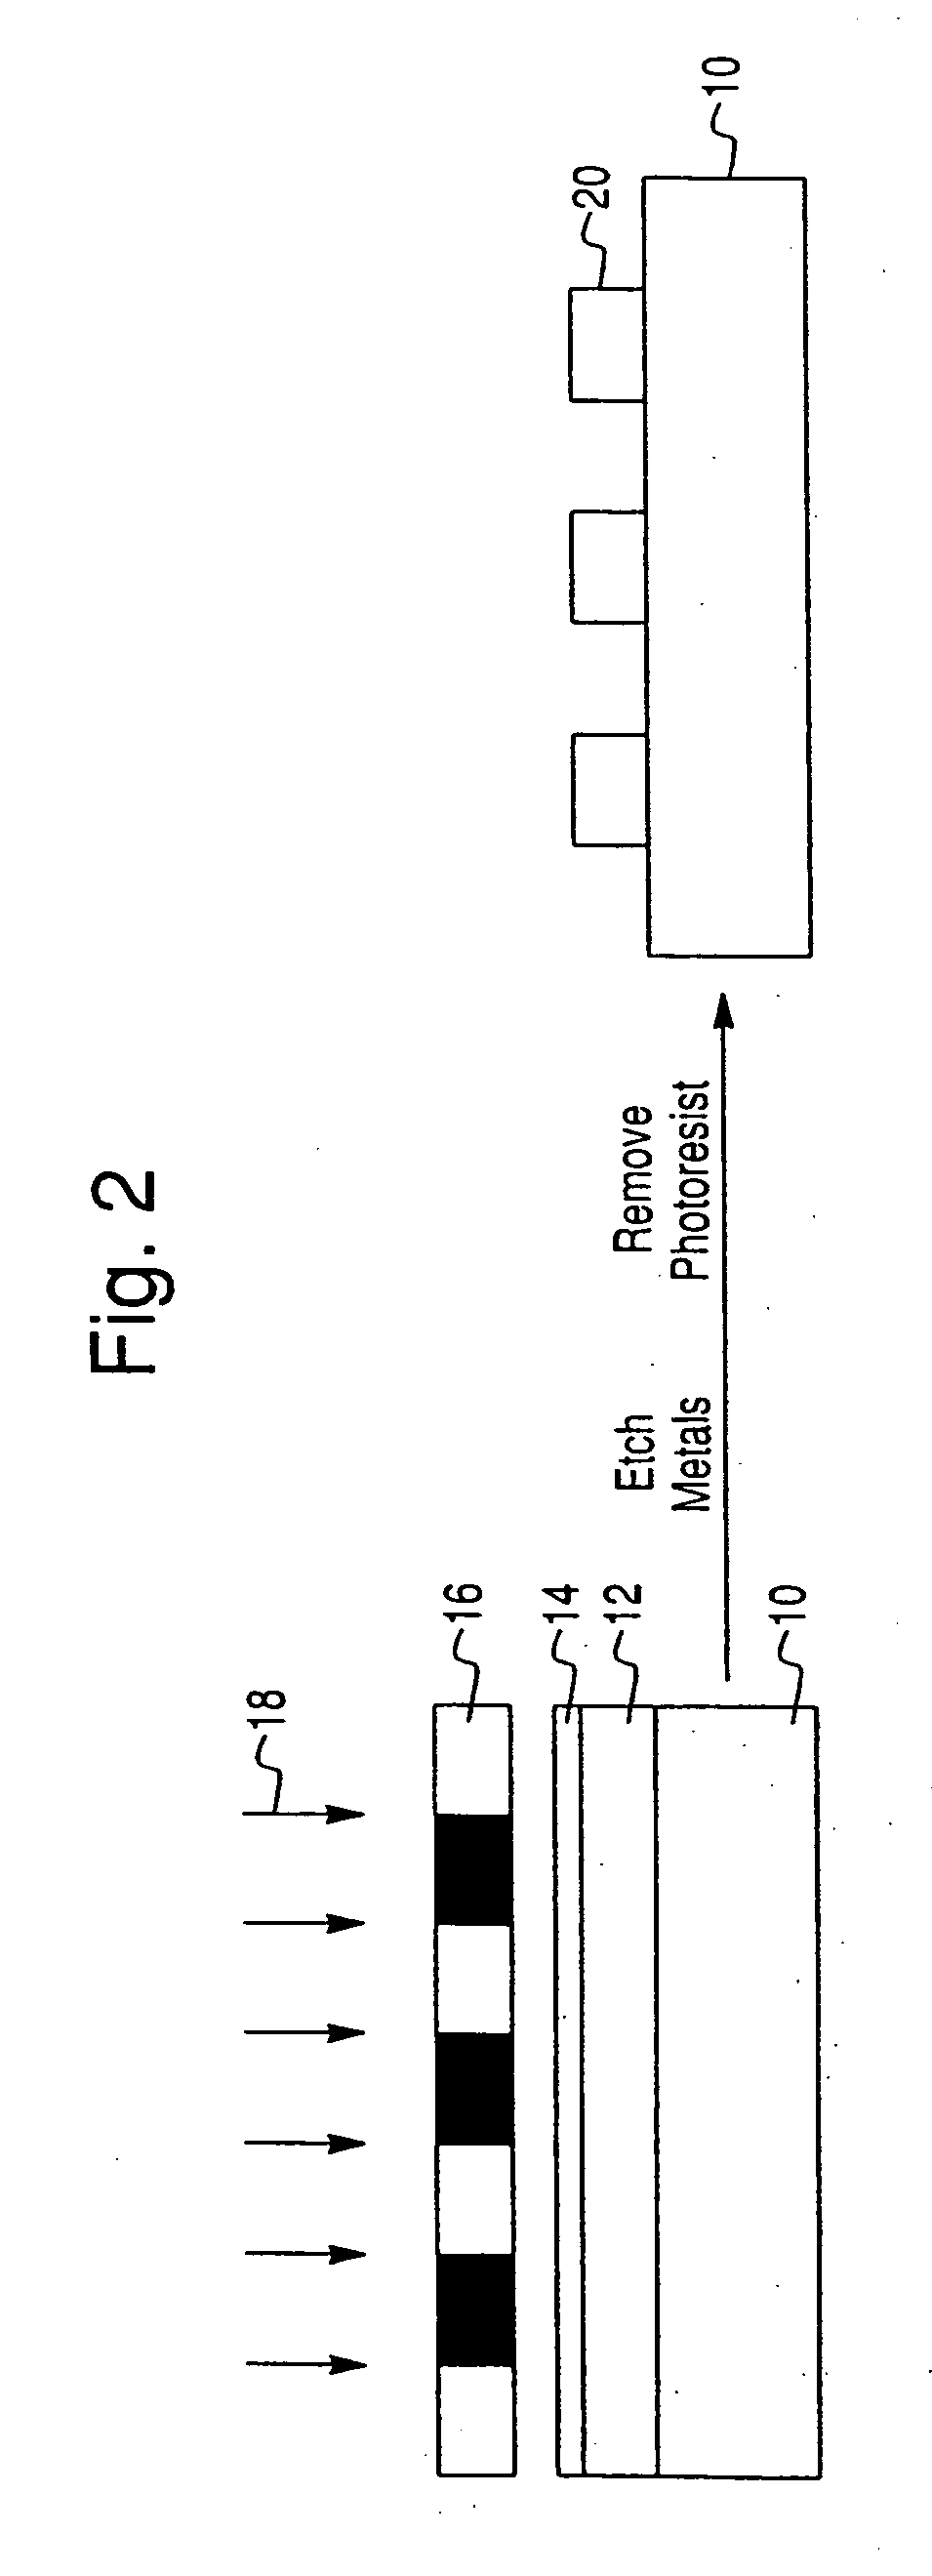 Spatially selective deposition of polysaccharide layer onto patterned template